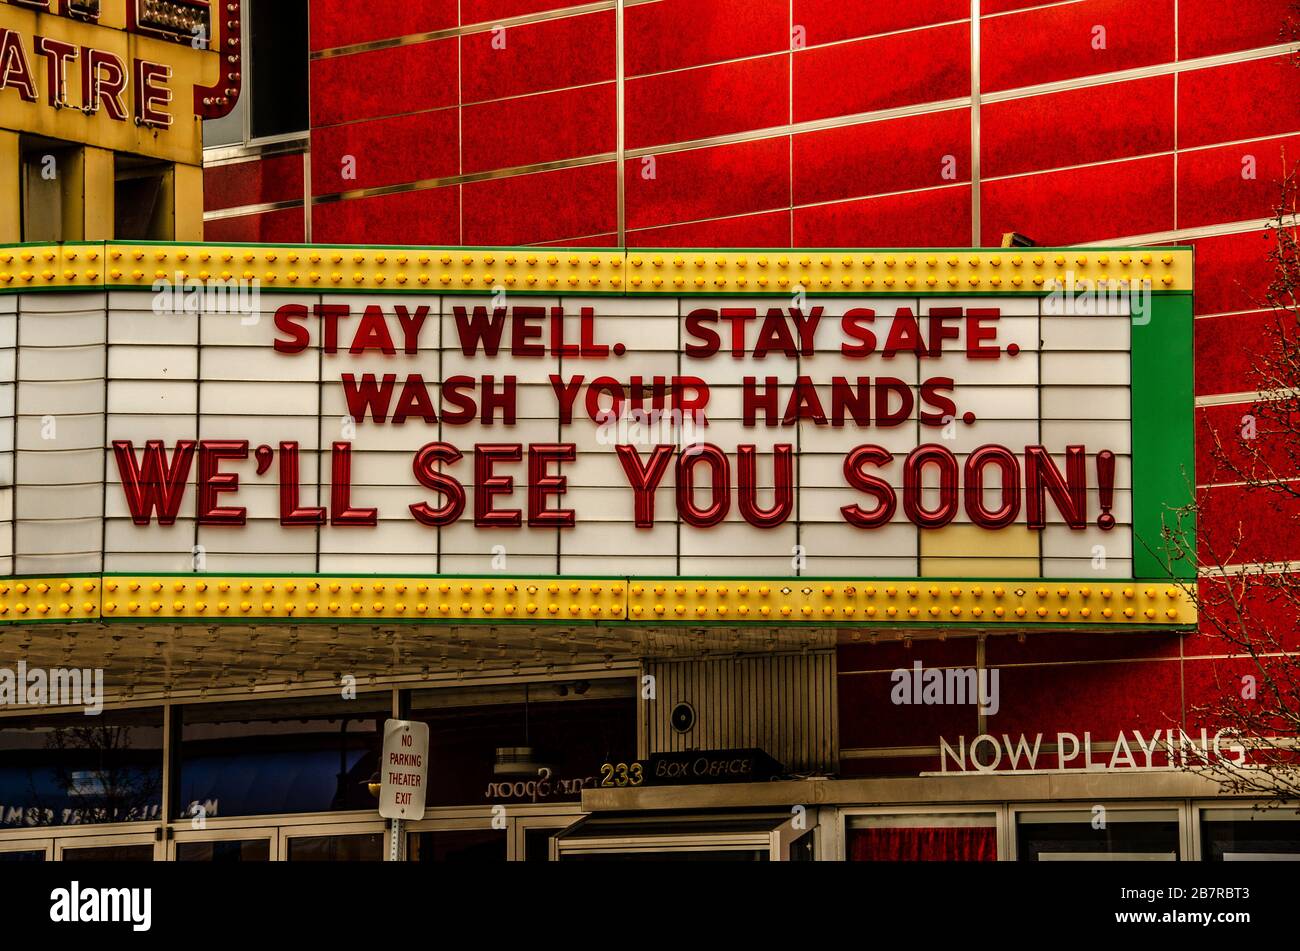 Closed movie theatre telling people to stay safe from the coronavirus by washing their hands. Stock Photo